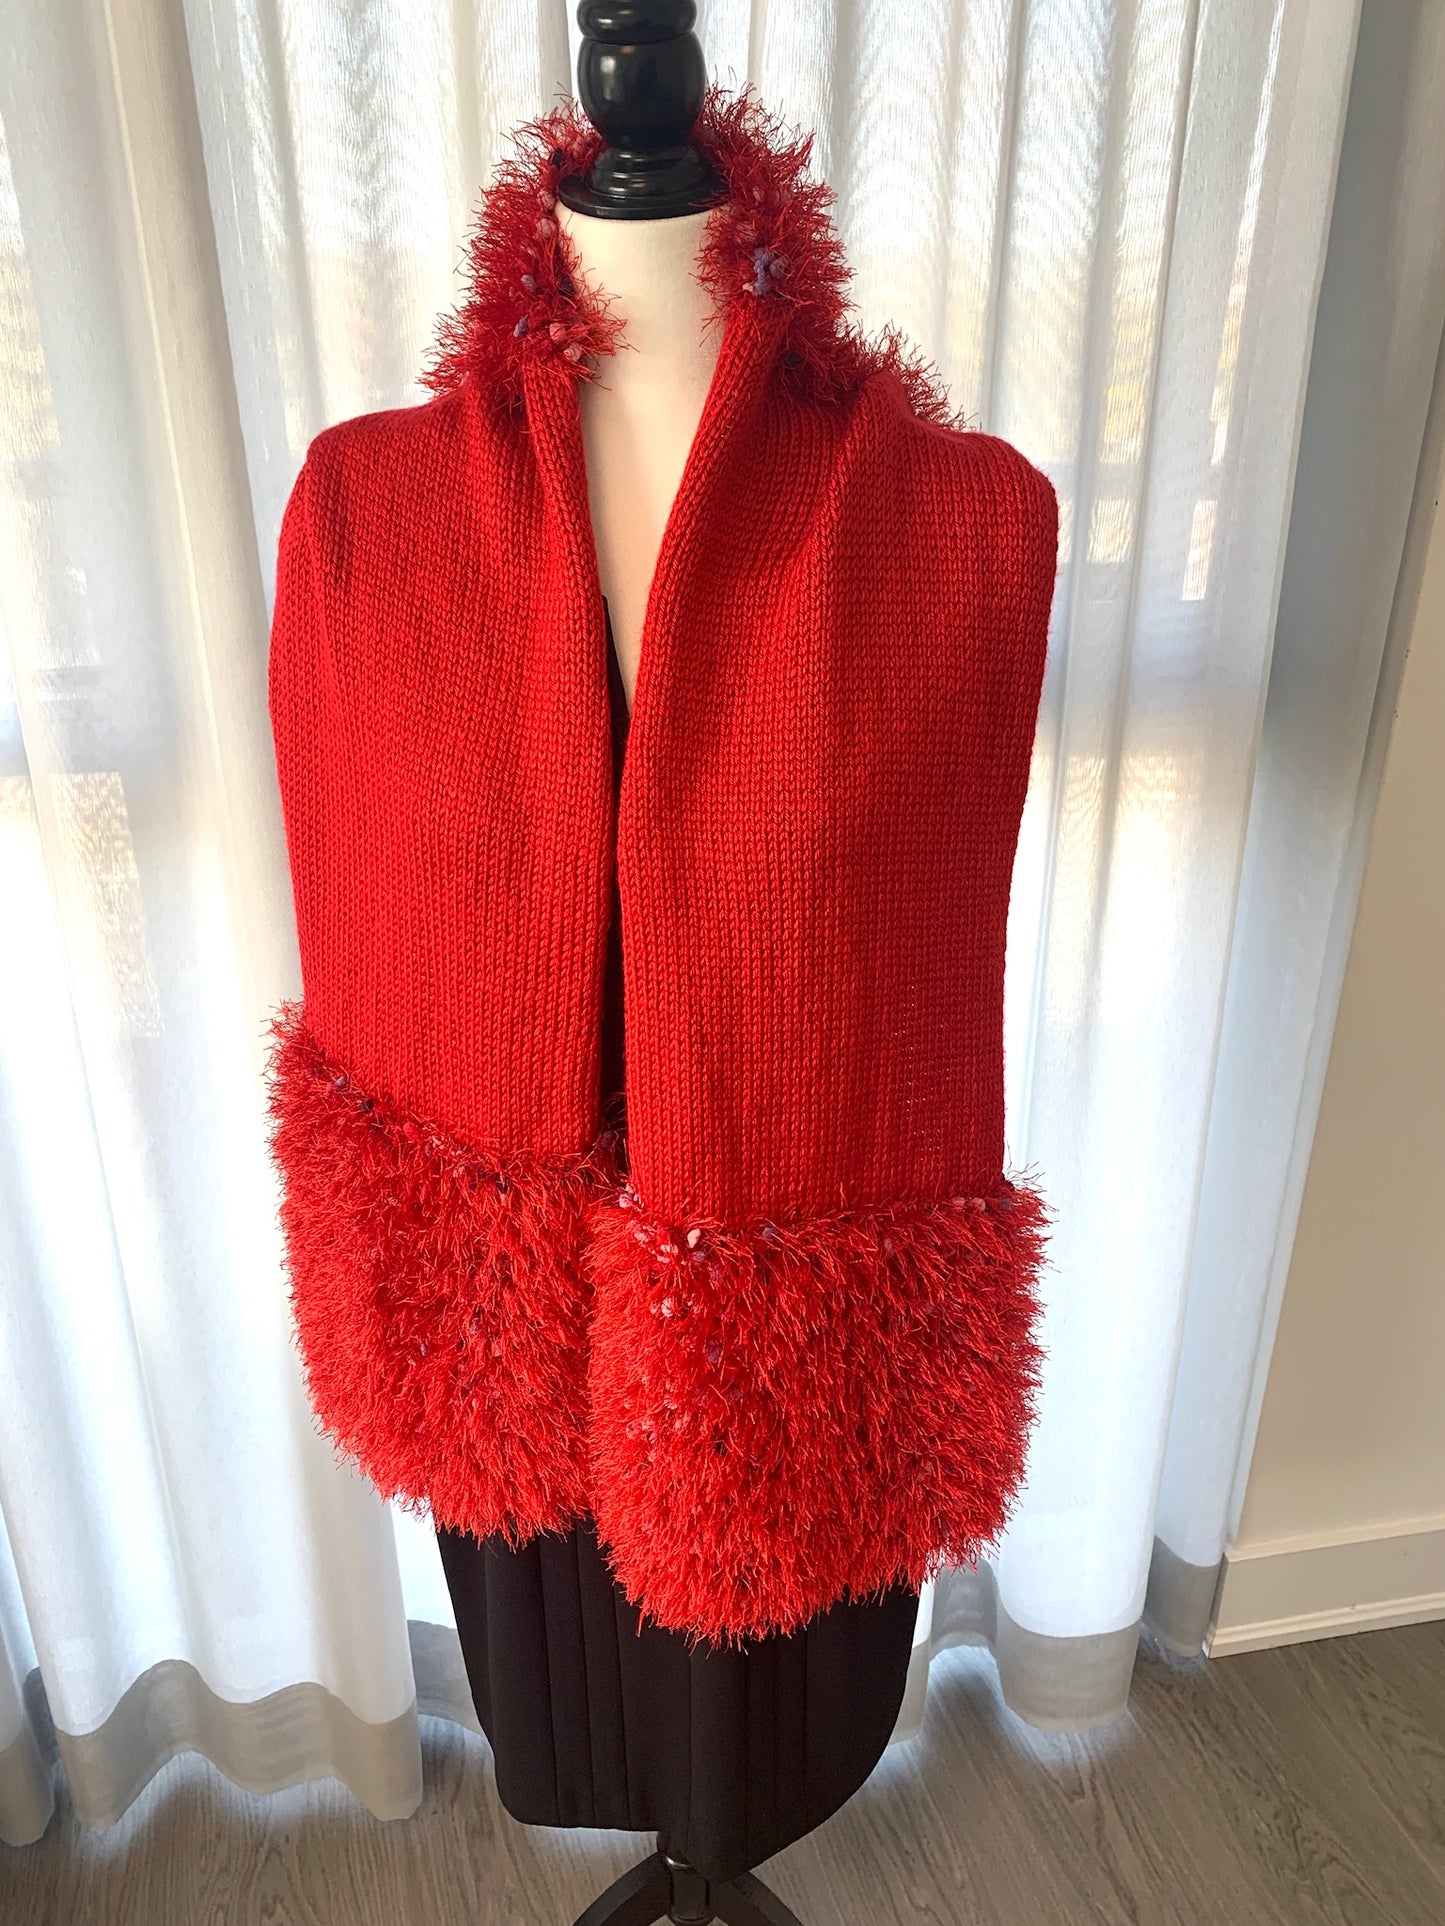 Hand knitted Wrap / Shawl